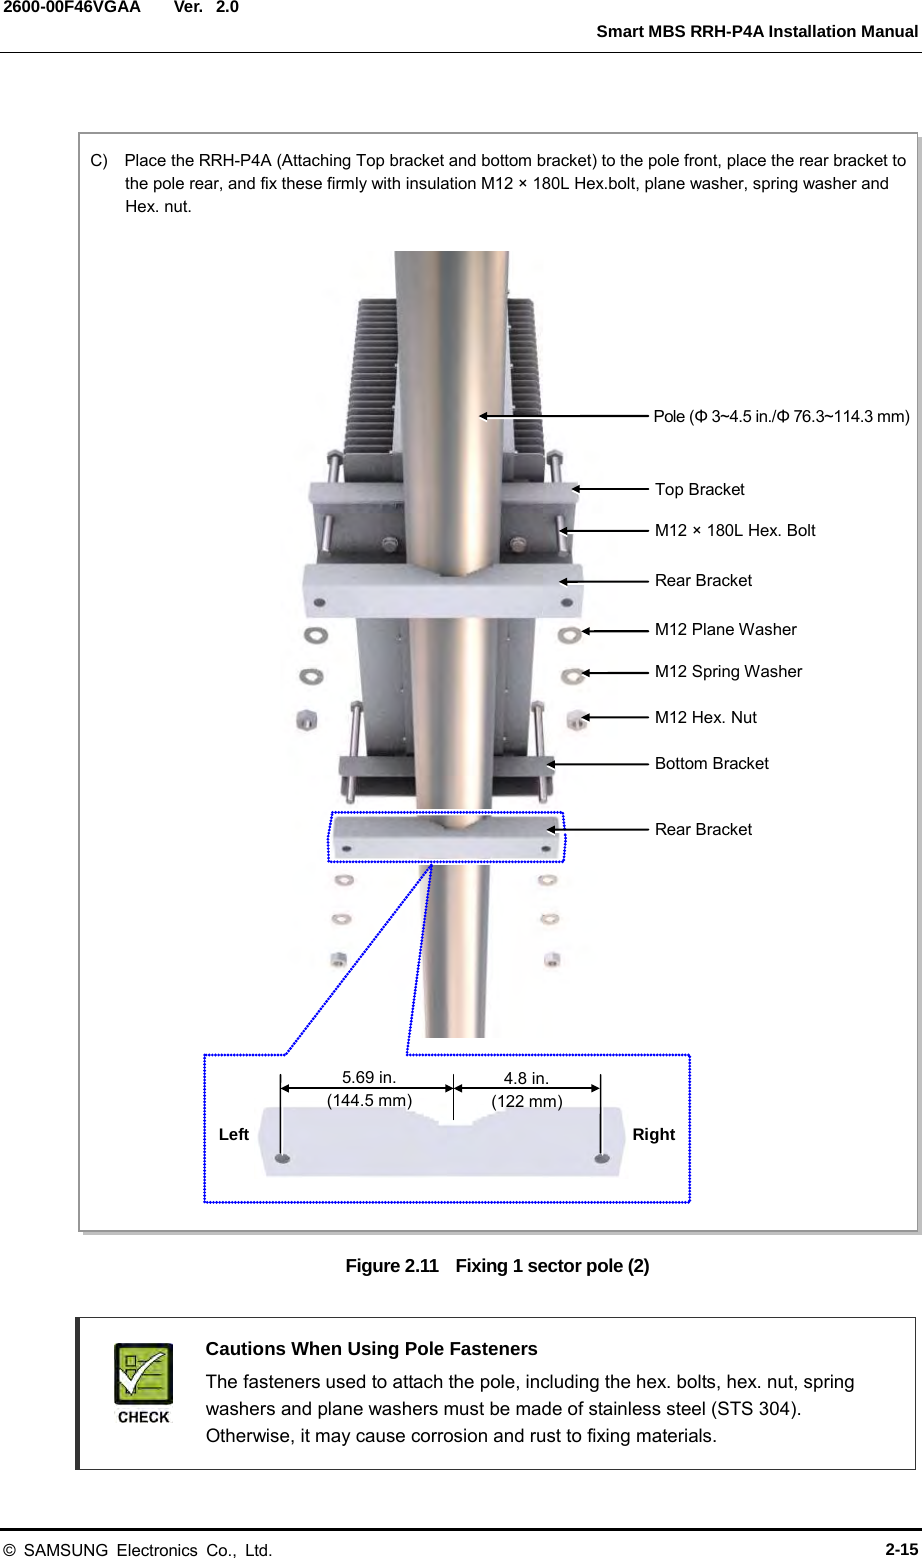  Ver.   Smart MBS RRH-P4A Installation Manual 2600-00F46VGAA 2.0  Figure 2.11   Fixing 1 sector pole (2)   Cautions When Using Pole Fasteners  The fasteners used to attach the pole, including the hex. bolts, hex. nut, spring washers and plane washers must be made of stainless steel (STS 304). Otherwise, it may cause corrosion and rust to fixing materials. C)  Place the RRH-P4A (Attaching Top bracket and bottom bracket) to the pole front, place the rear bracket to the pole rear, and fix these firmly with insulation M12 × 180L Hex.bolt, plane washer, spring washer and Hex. nut.  M12 × 180L Hex. Bolt Pole (Φ 3~4.5 in./Φ 76.3~114.3 mm) Top Bracket Rear Bracket M12 Plane Washer M12 Spring Washer M12 Hex. Nut Rear Bracket Bottom Bracket  5.69 in. (144.5 mm) 4.8 in. (122 mm) Left Right © SAMSUNG Electronics Co., Ltd. 2-15 